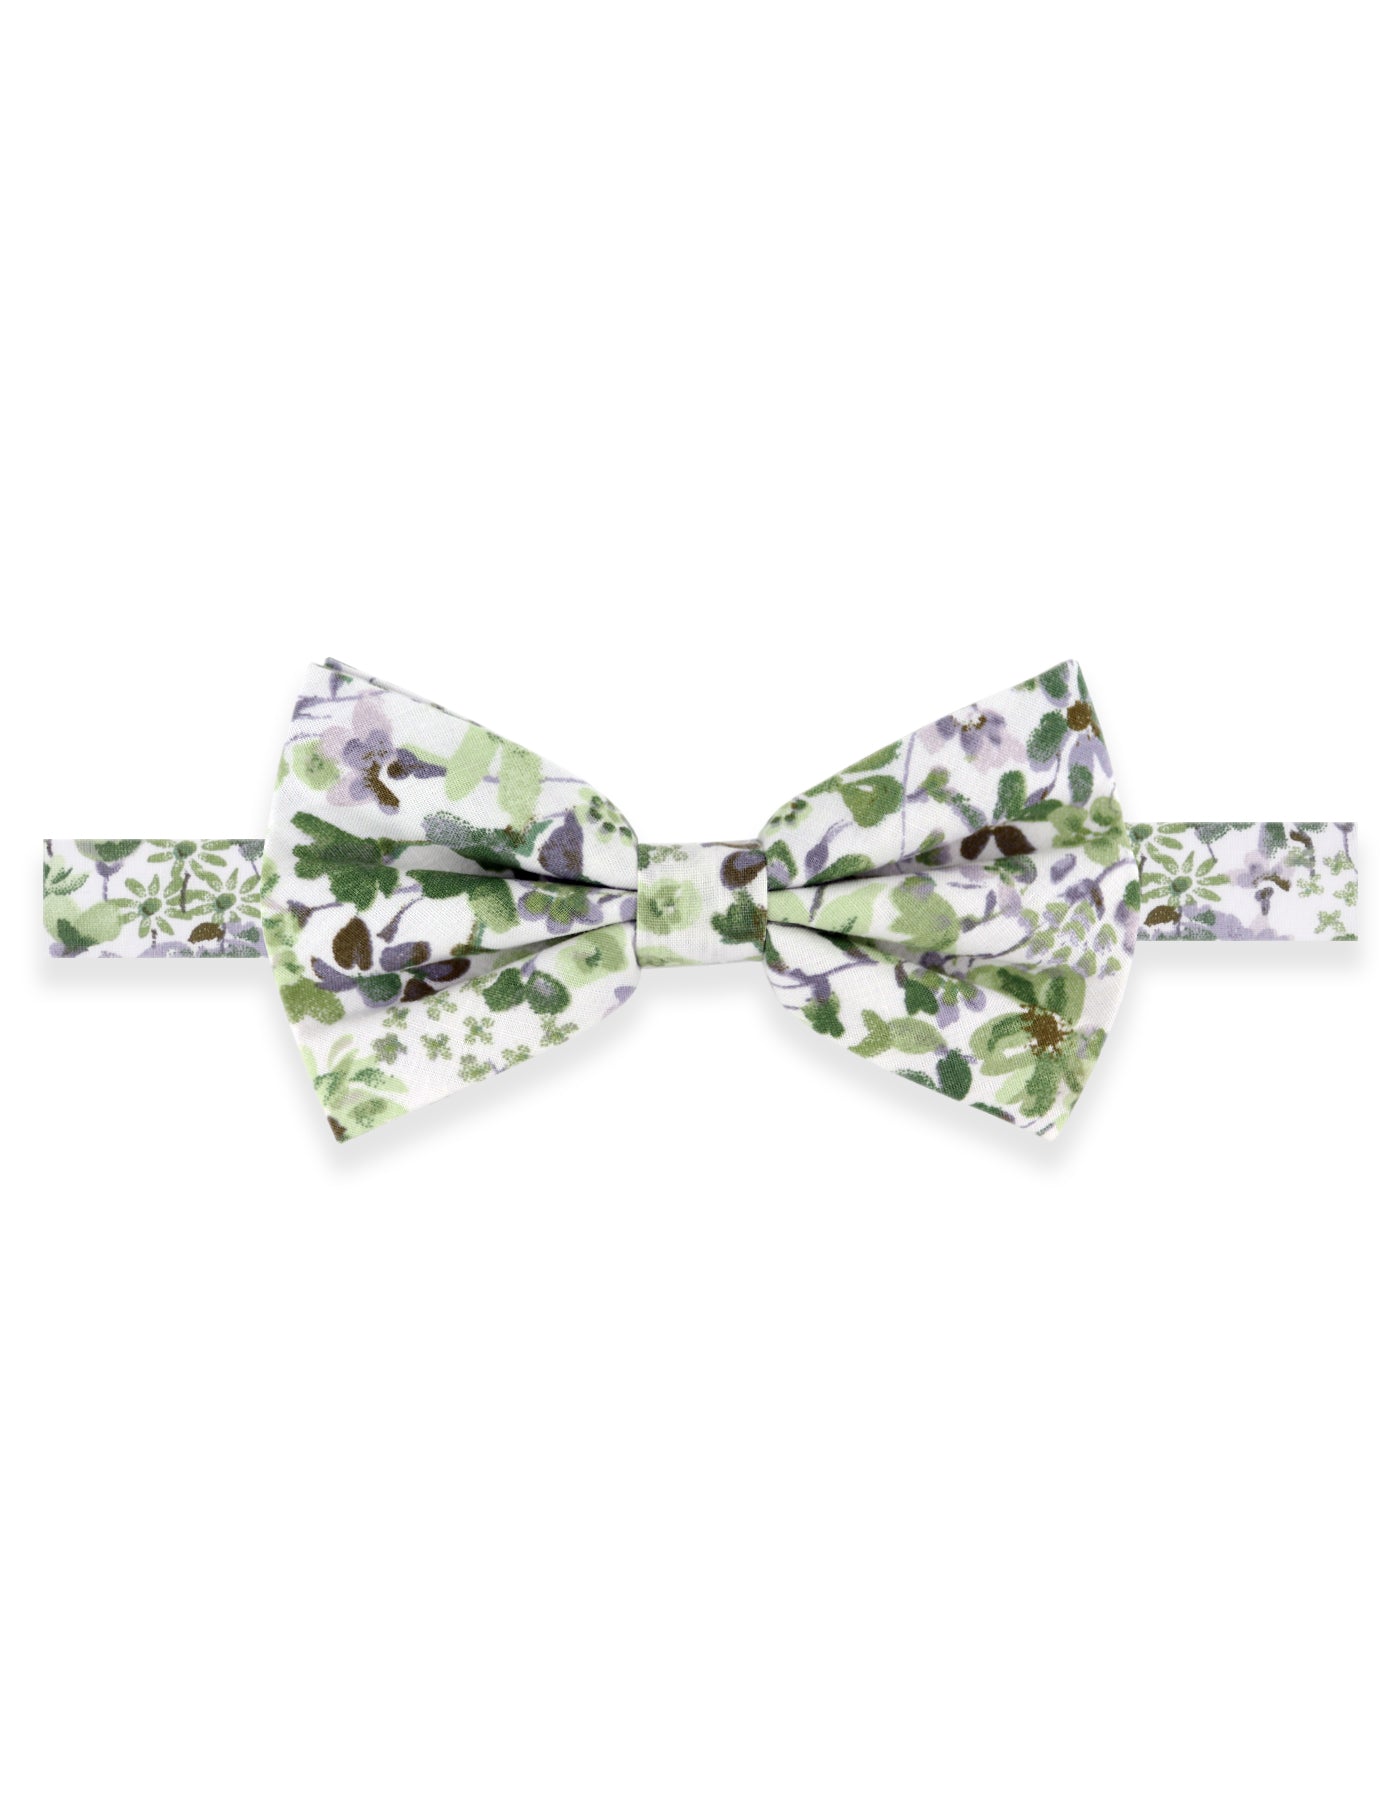 100% Cotton Floral Print Pocket Square - Green And White